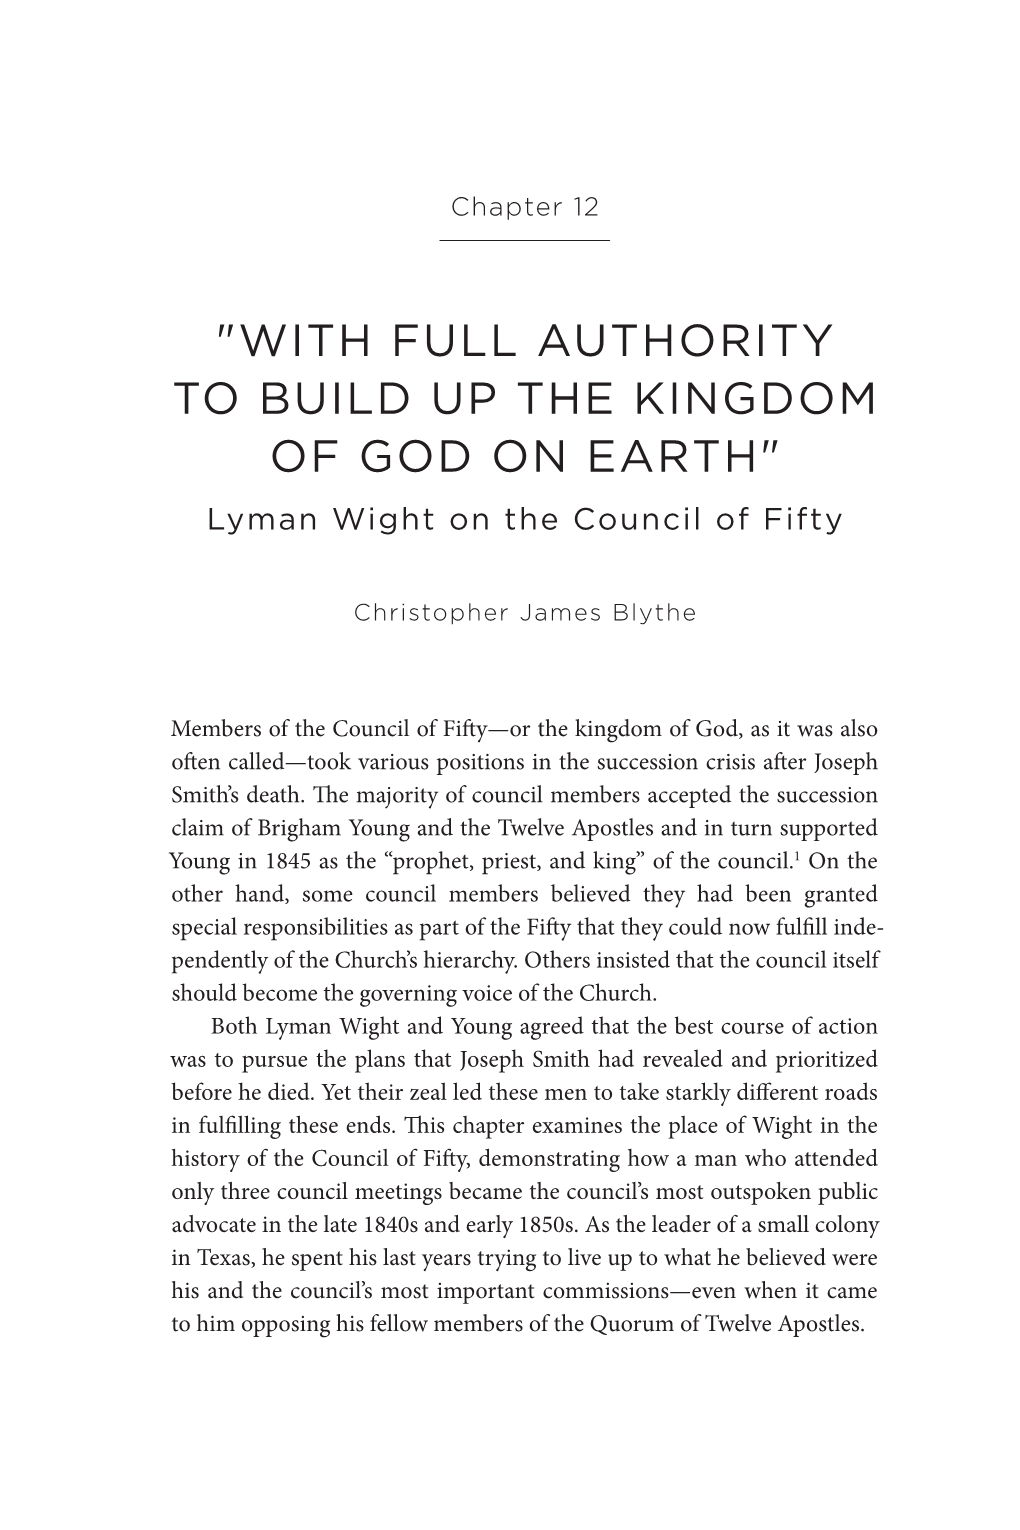 "WITH FULL AUTHORITY to BUILD up the KINGDOM of GOD on EARTH" Lyman Wight on the Council of Fifty